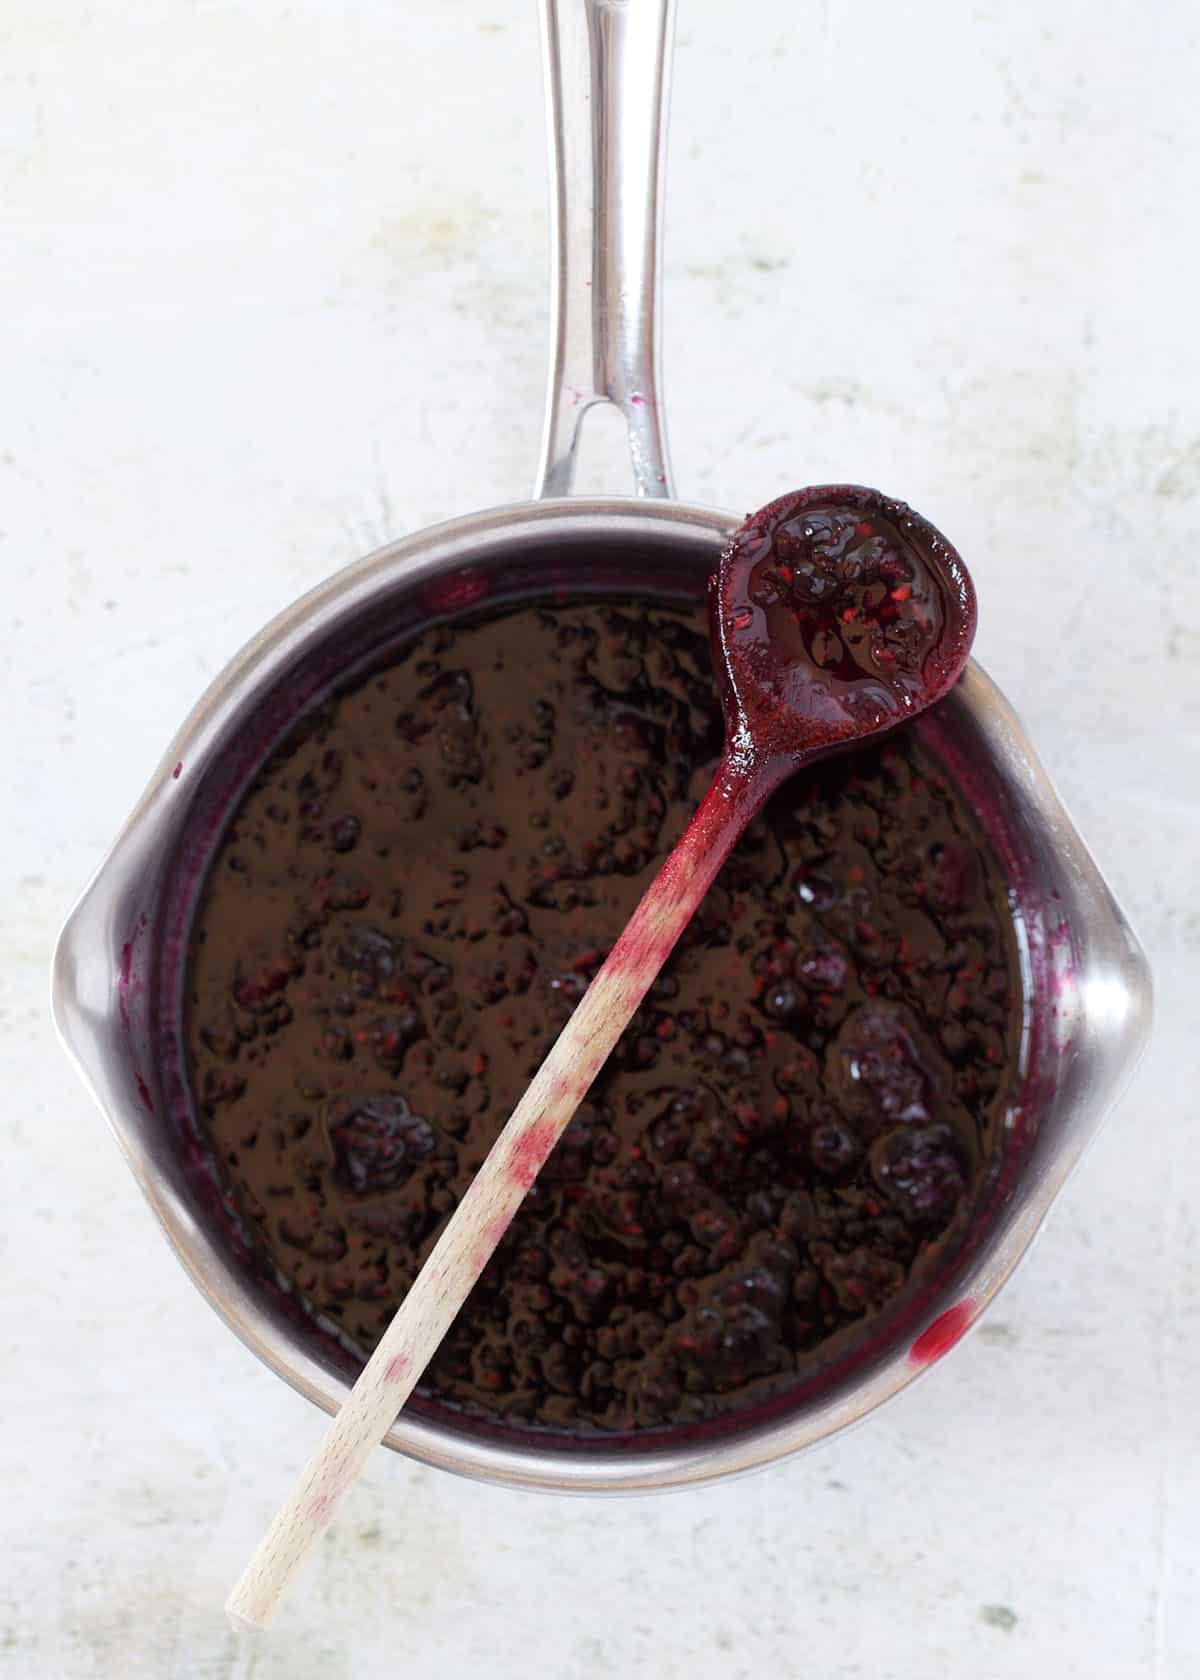 a saucepan containing blackberry compote with a small wooden spoon resting across it